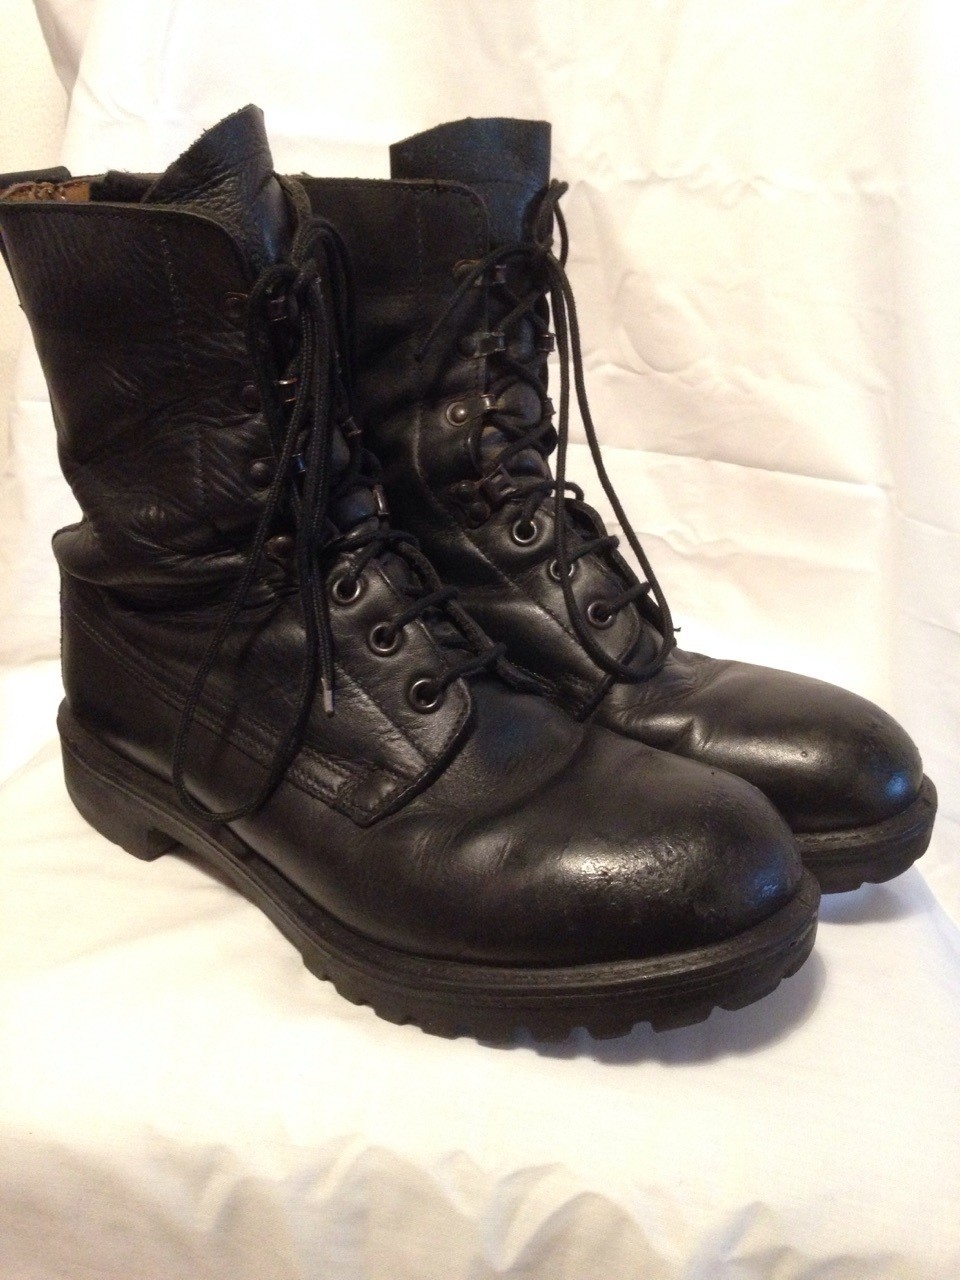 British Army Assault Boots Size 11M